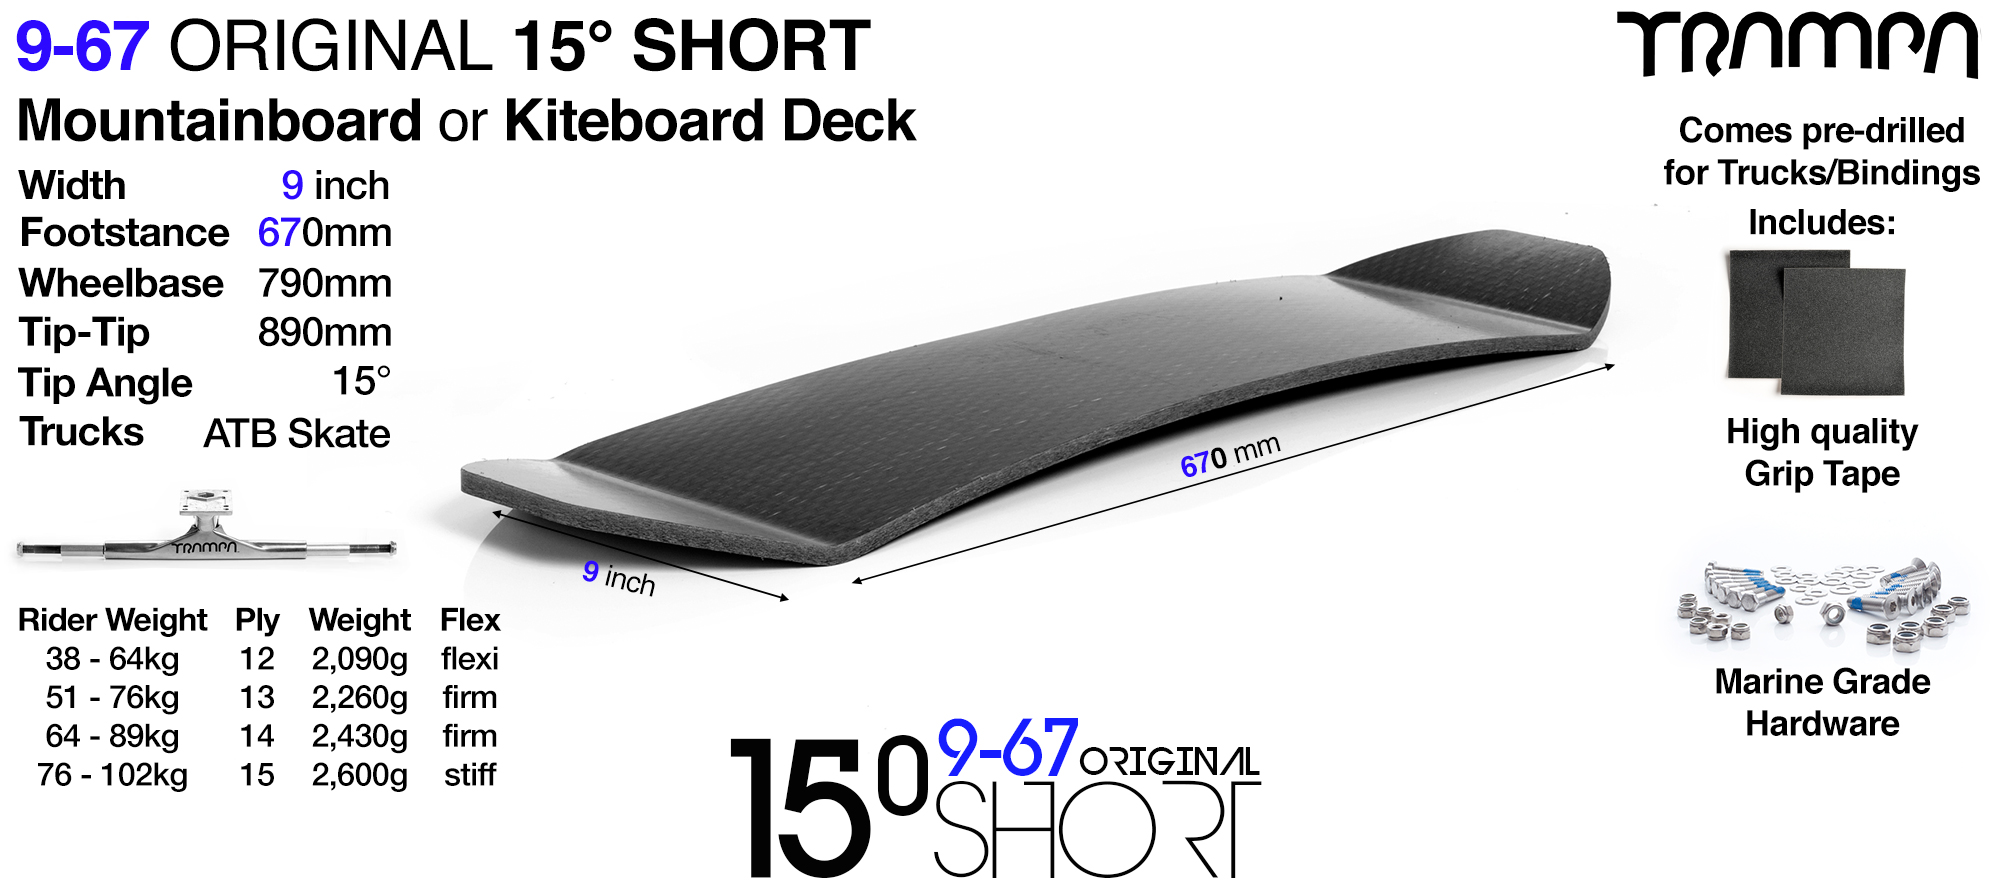 Original 12ply 15º Short Deck  - OUT OF STOCK